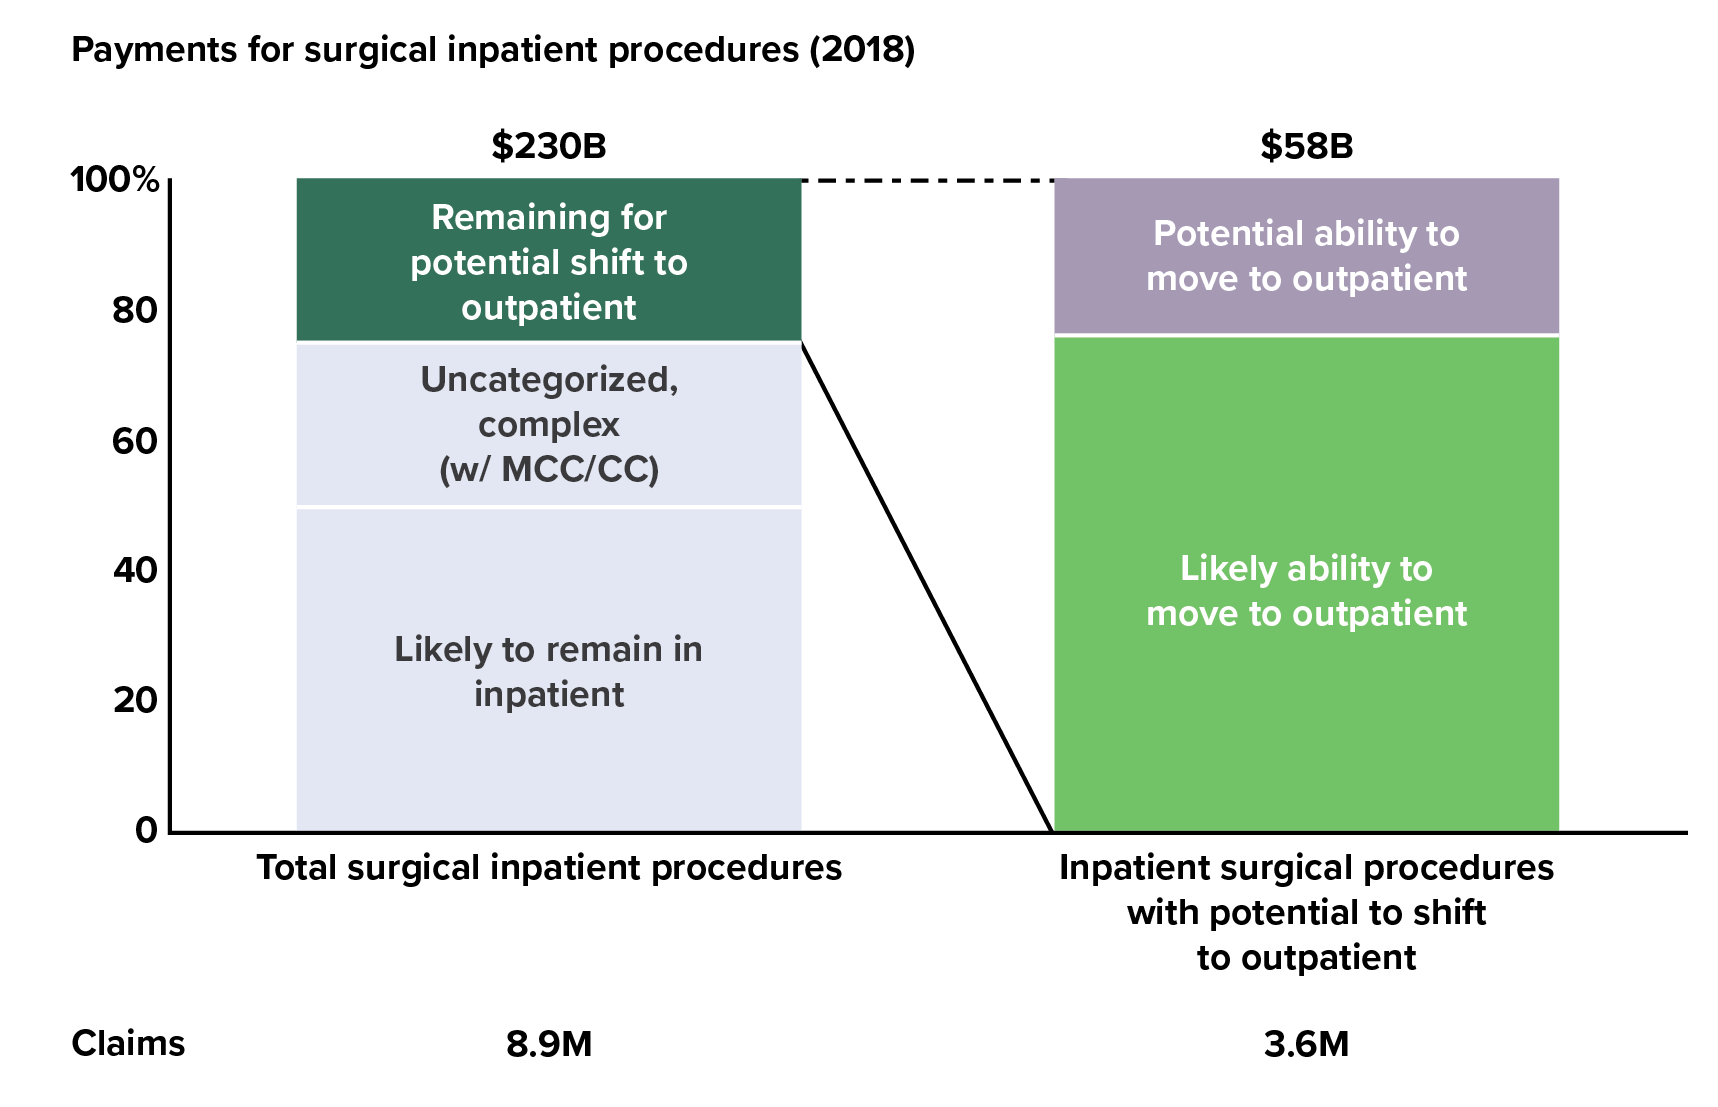 Payments for Surgical Inpatient Procedures (2018)